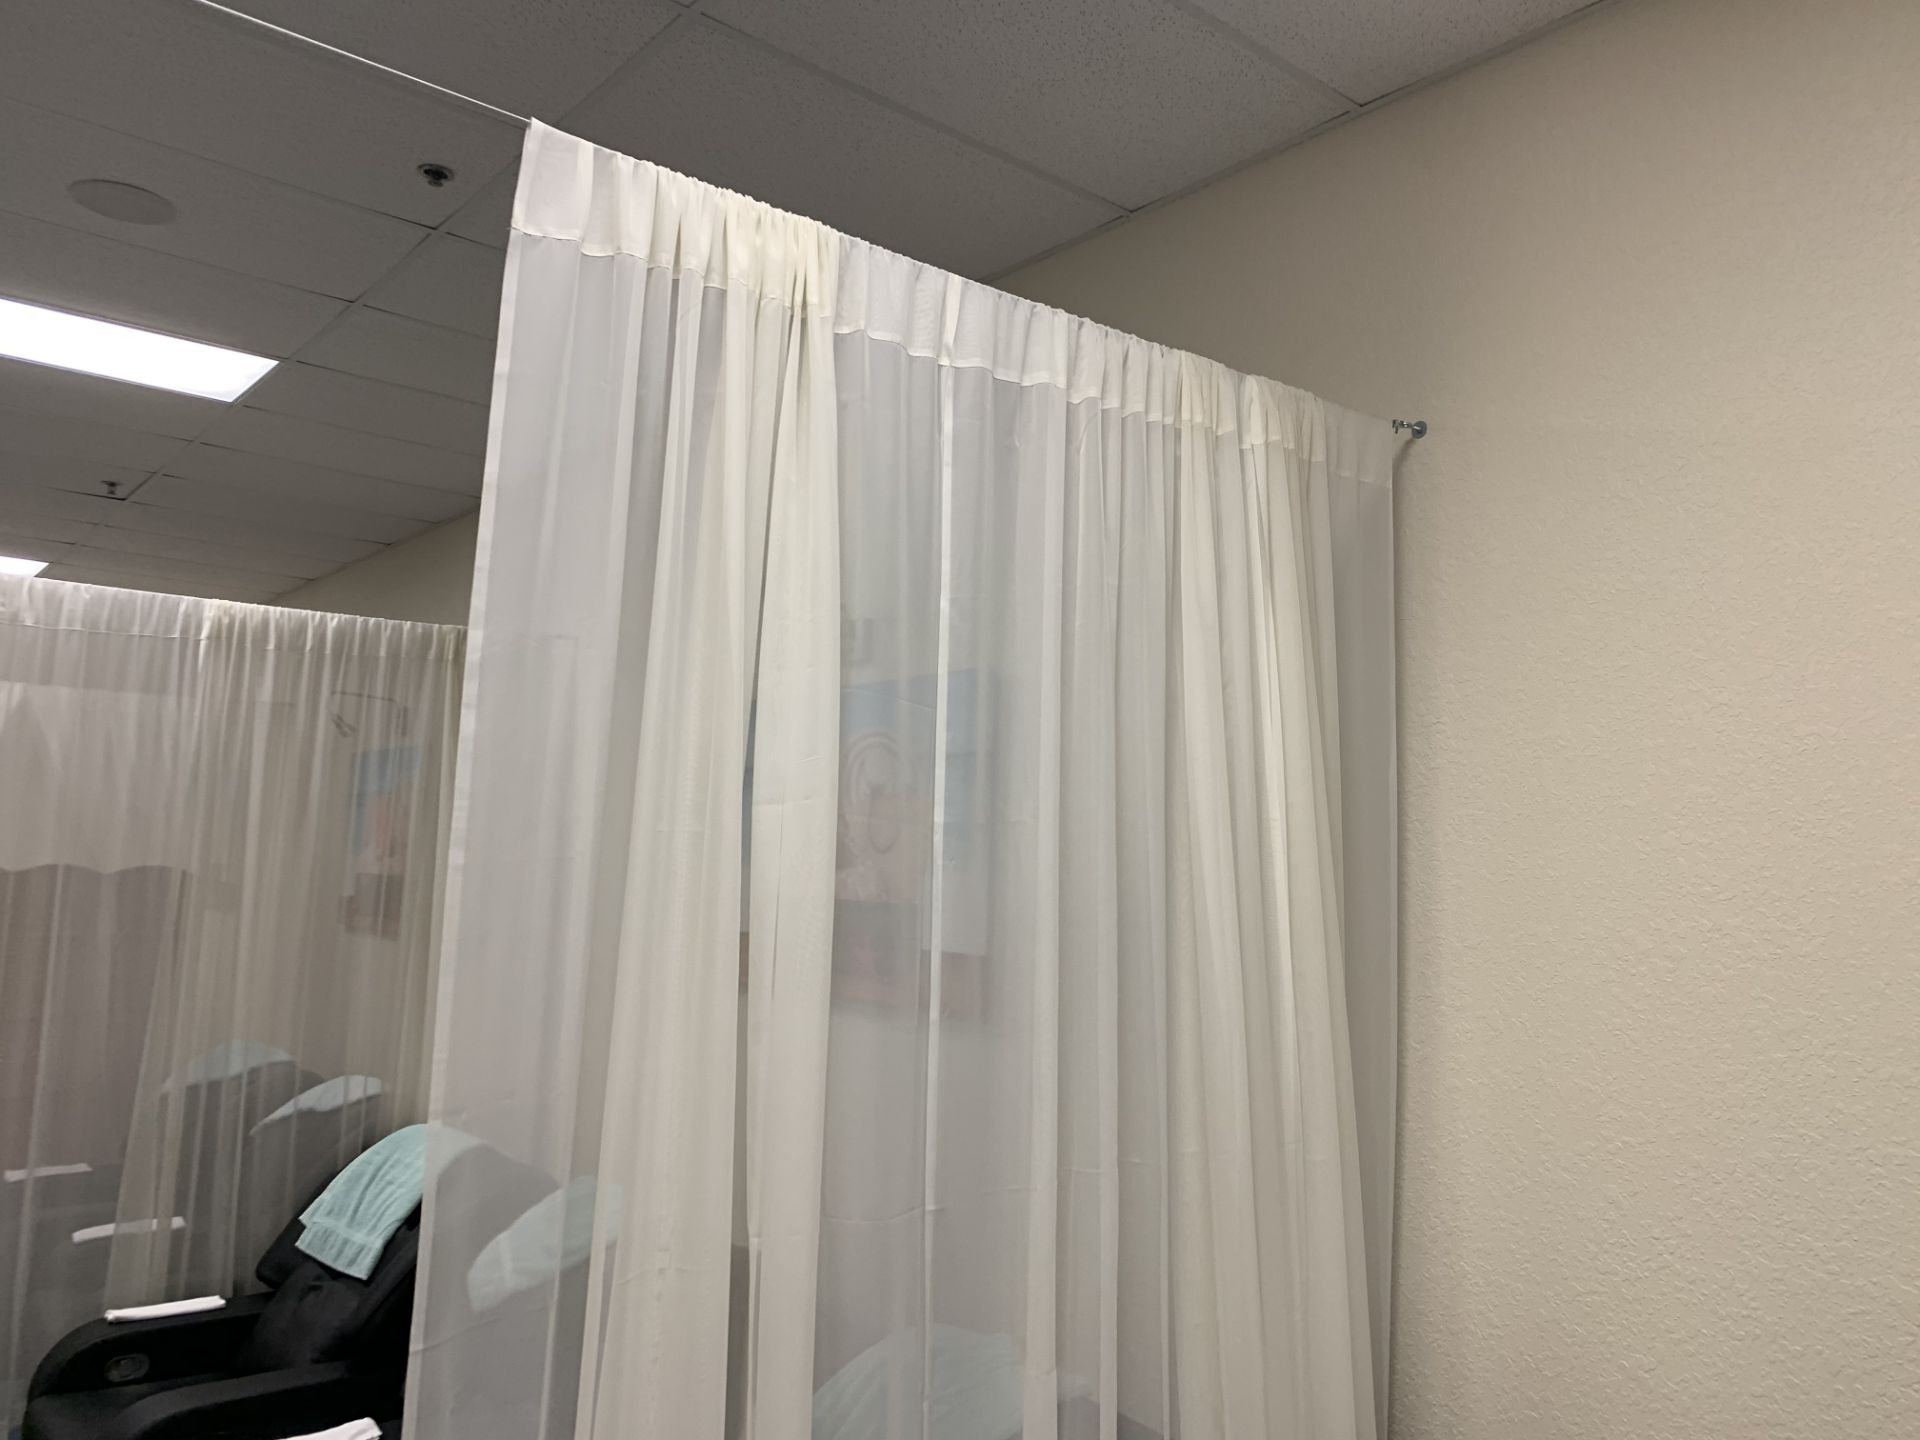 MOUNTED WIRE DIVIDERS WITH CURTAINS